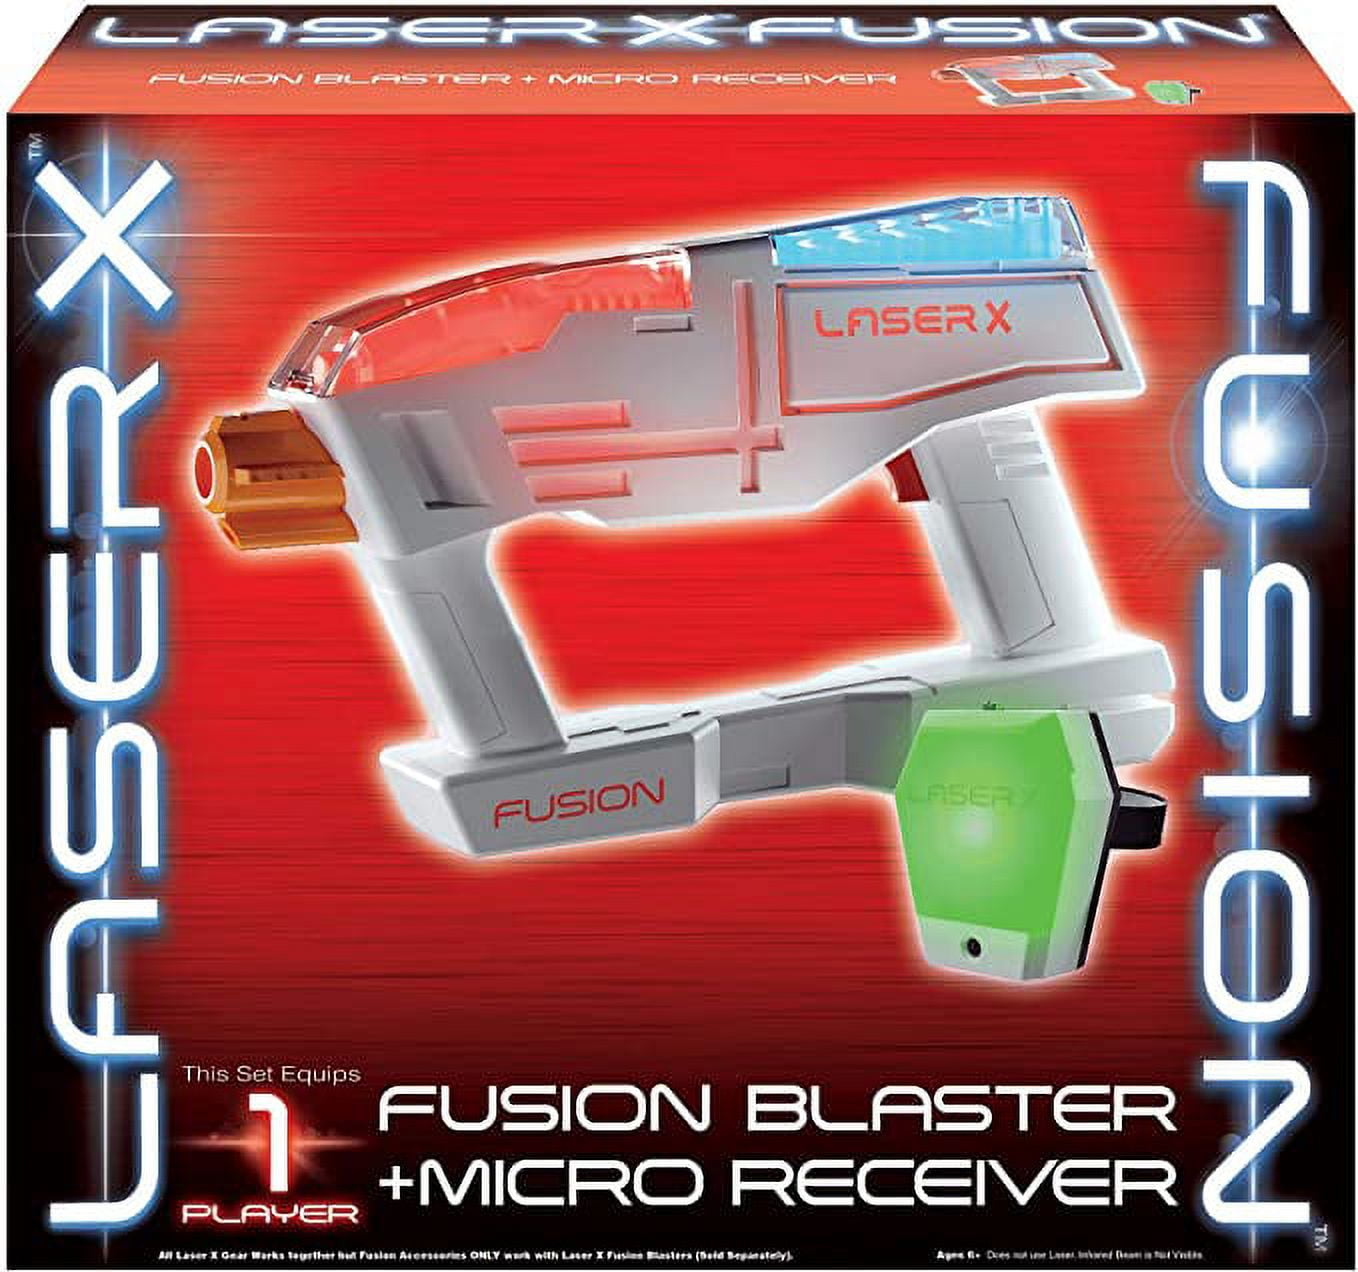 30 + Pack 20 One - Outdoor - Micro Blaster Wide Fun for Range Each x Toy Player X Fusion Pck 2 Home Blaster Entertainment at - Laser Feet Receiver, or